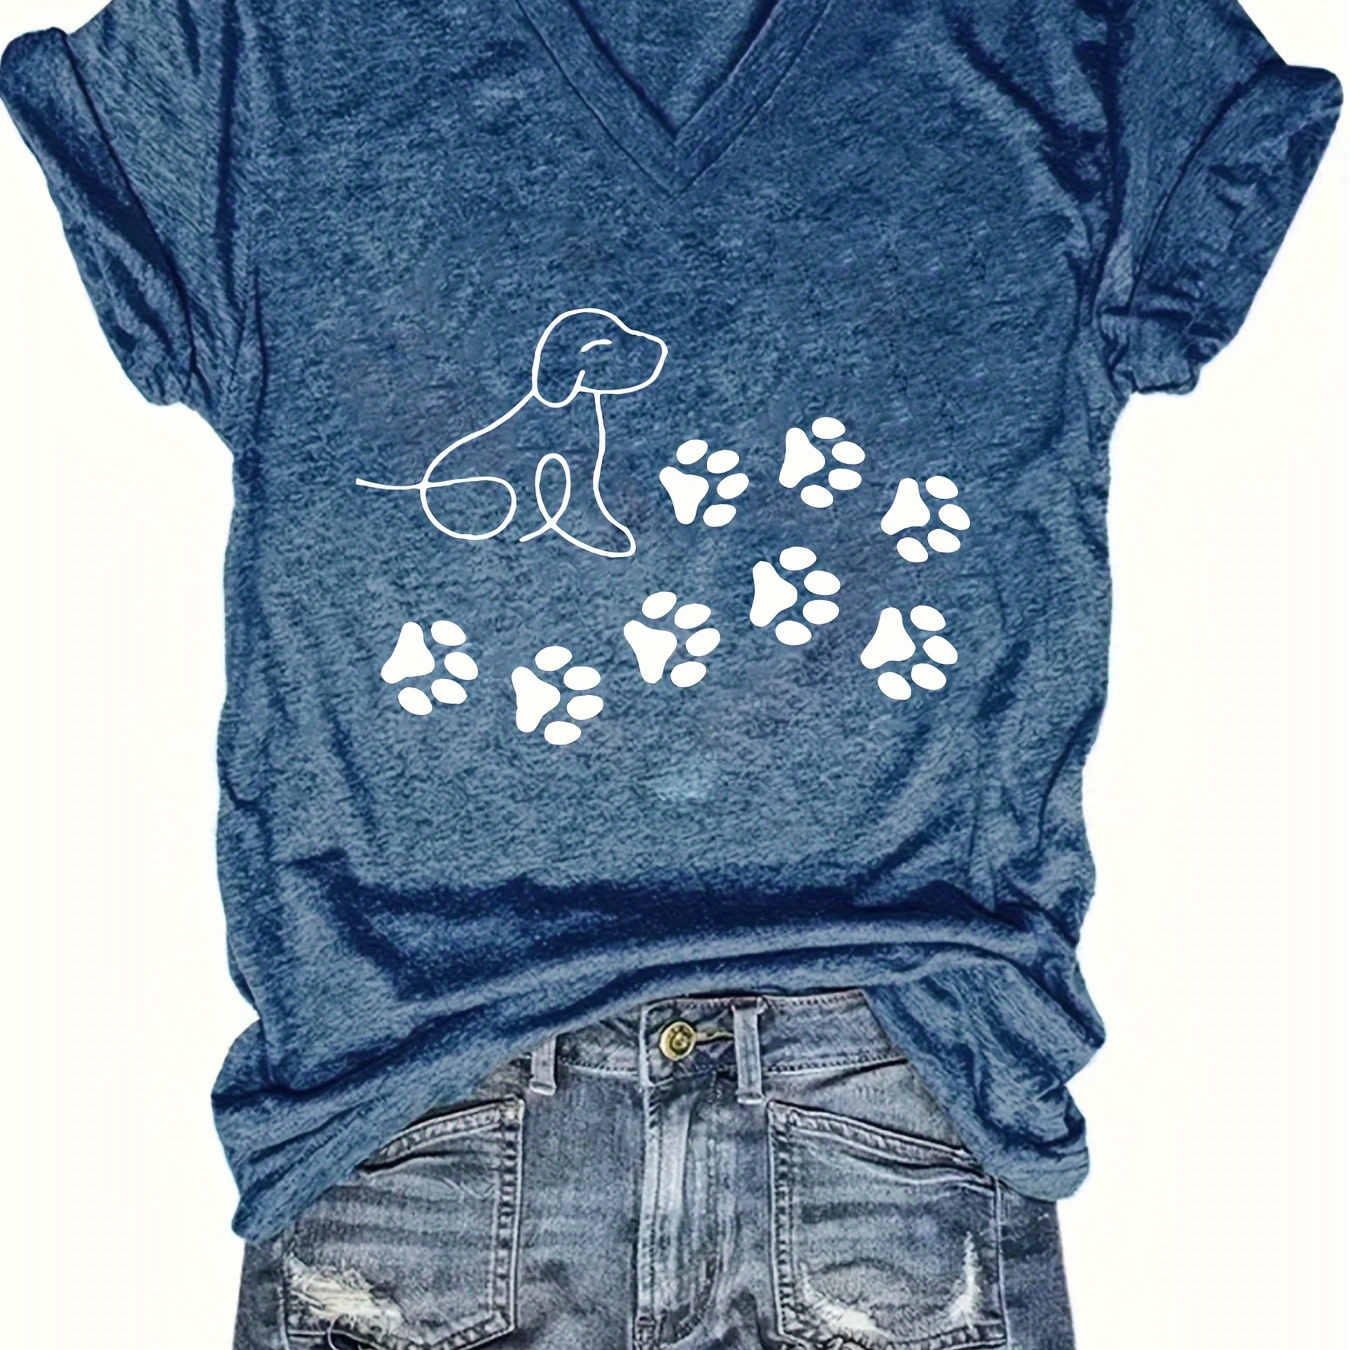 

Dog & Paw Print V Neck T-shirt, Casual Short Sleeve Summer Daily Top, Women's Clothing